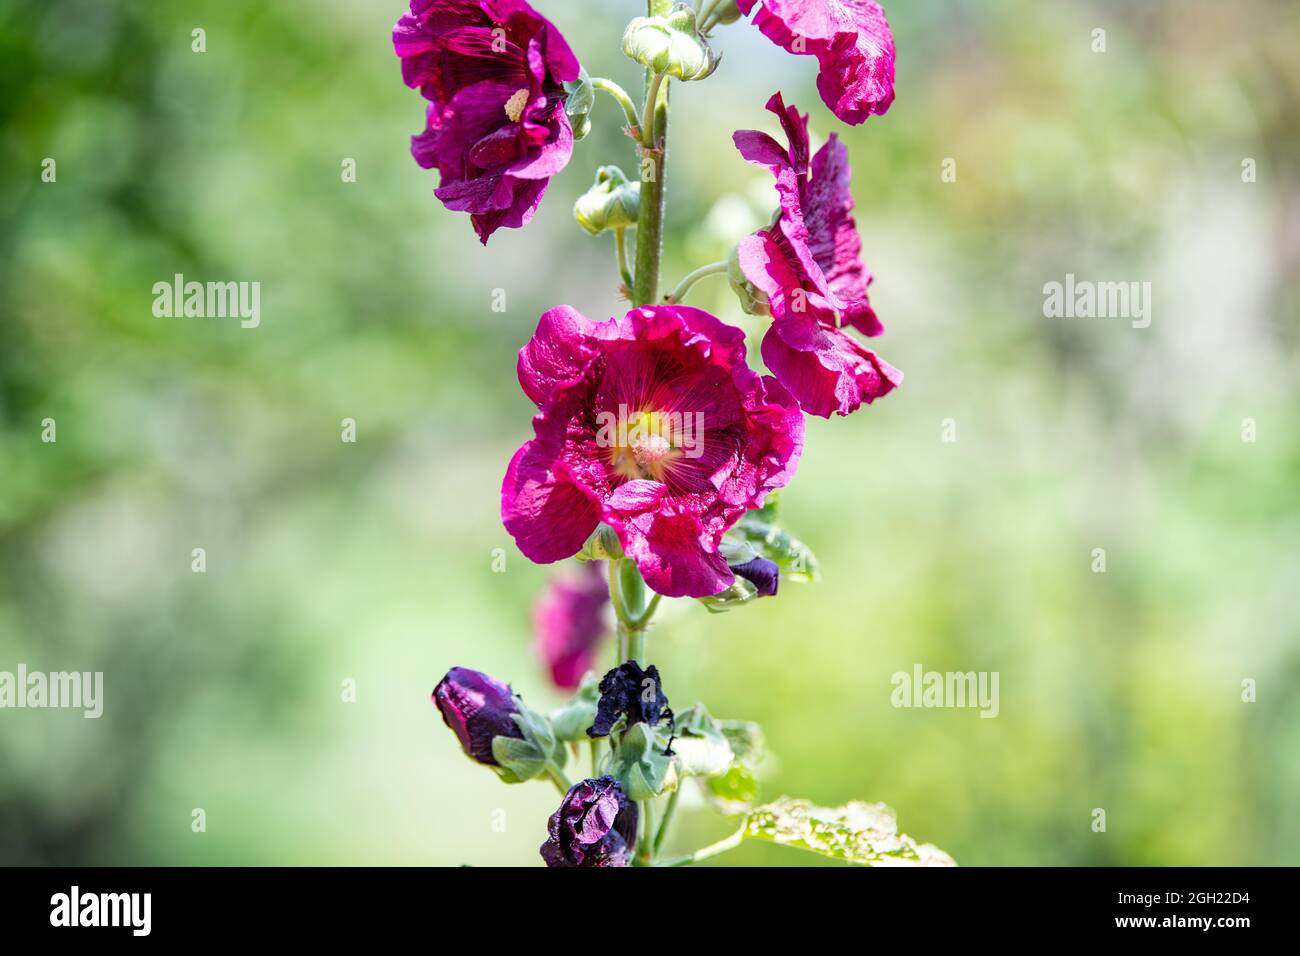 Hollyhock (Alcea) flower with green blurred background Stock Photo